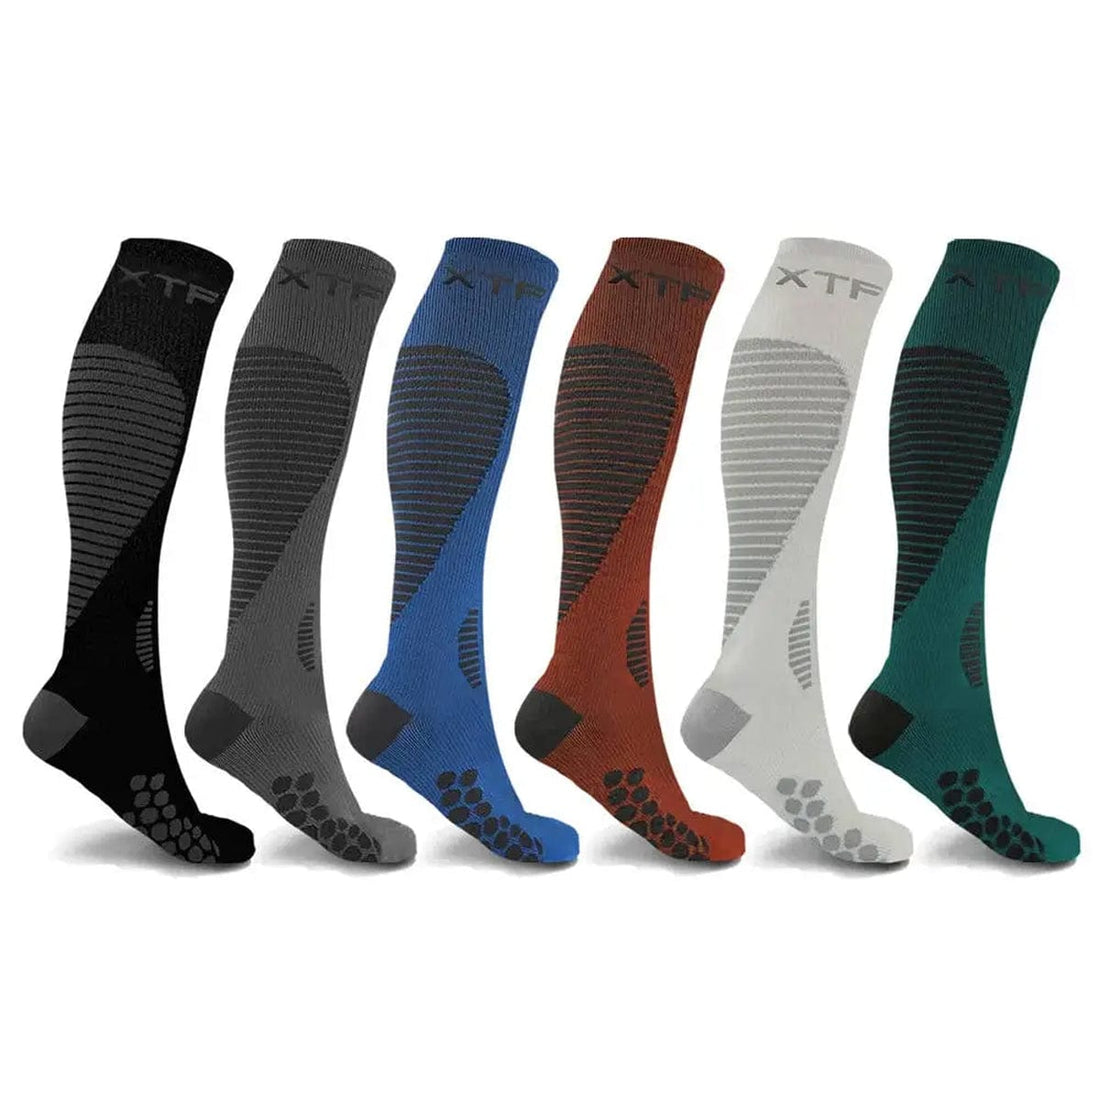 Extreme Fit Copper-Infused High-Energy Unisex Compression Socks, 6 Pack